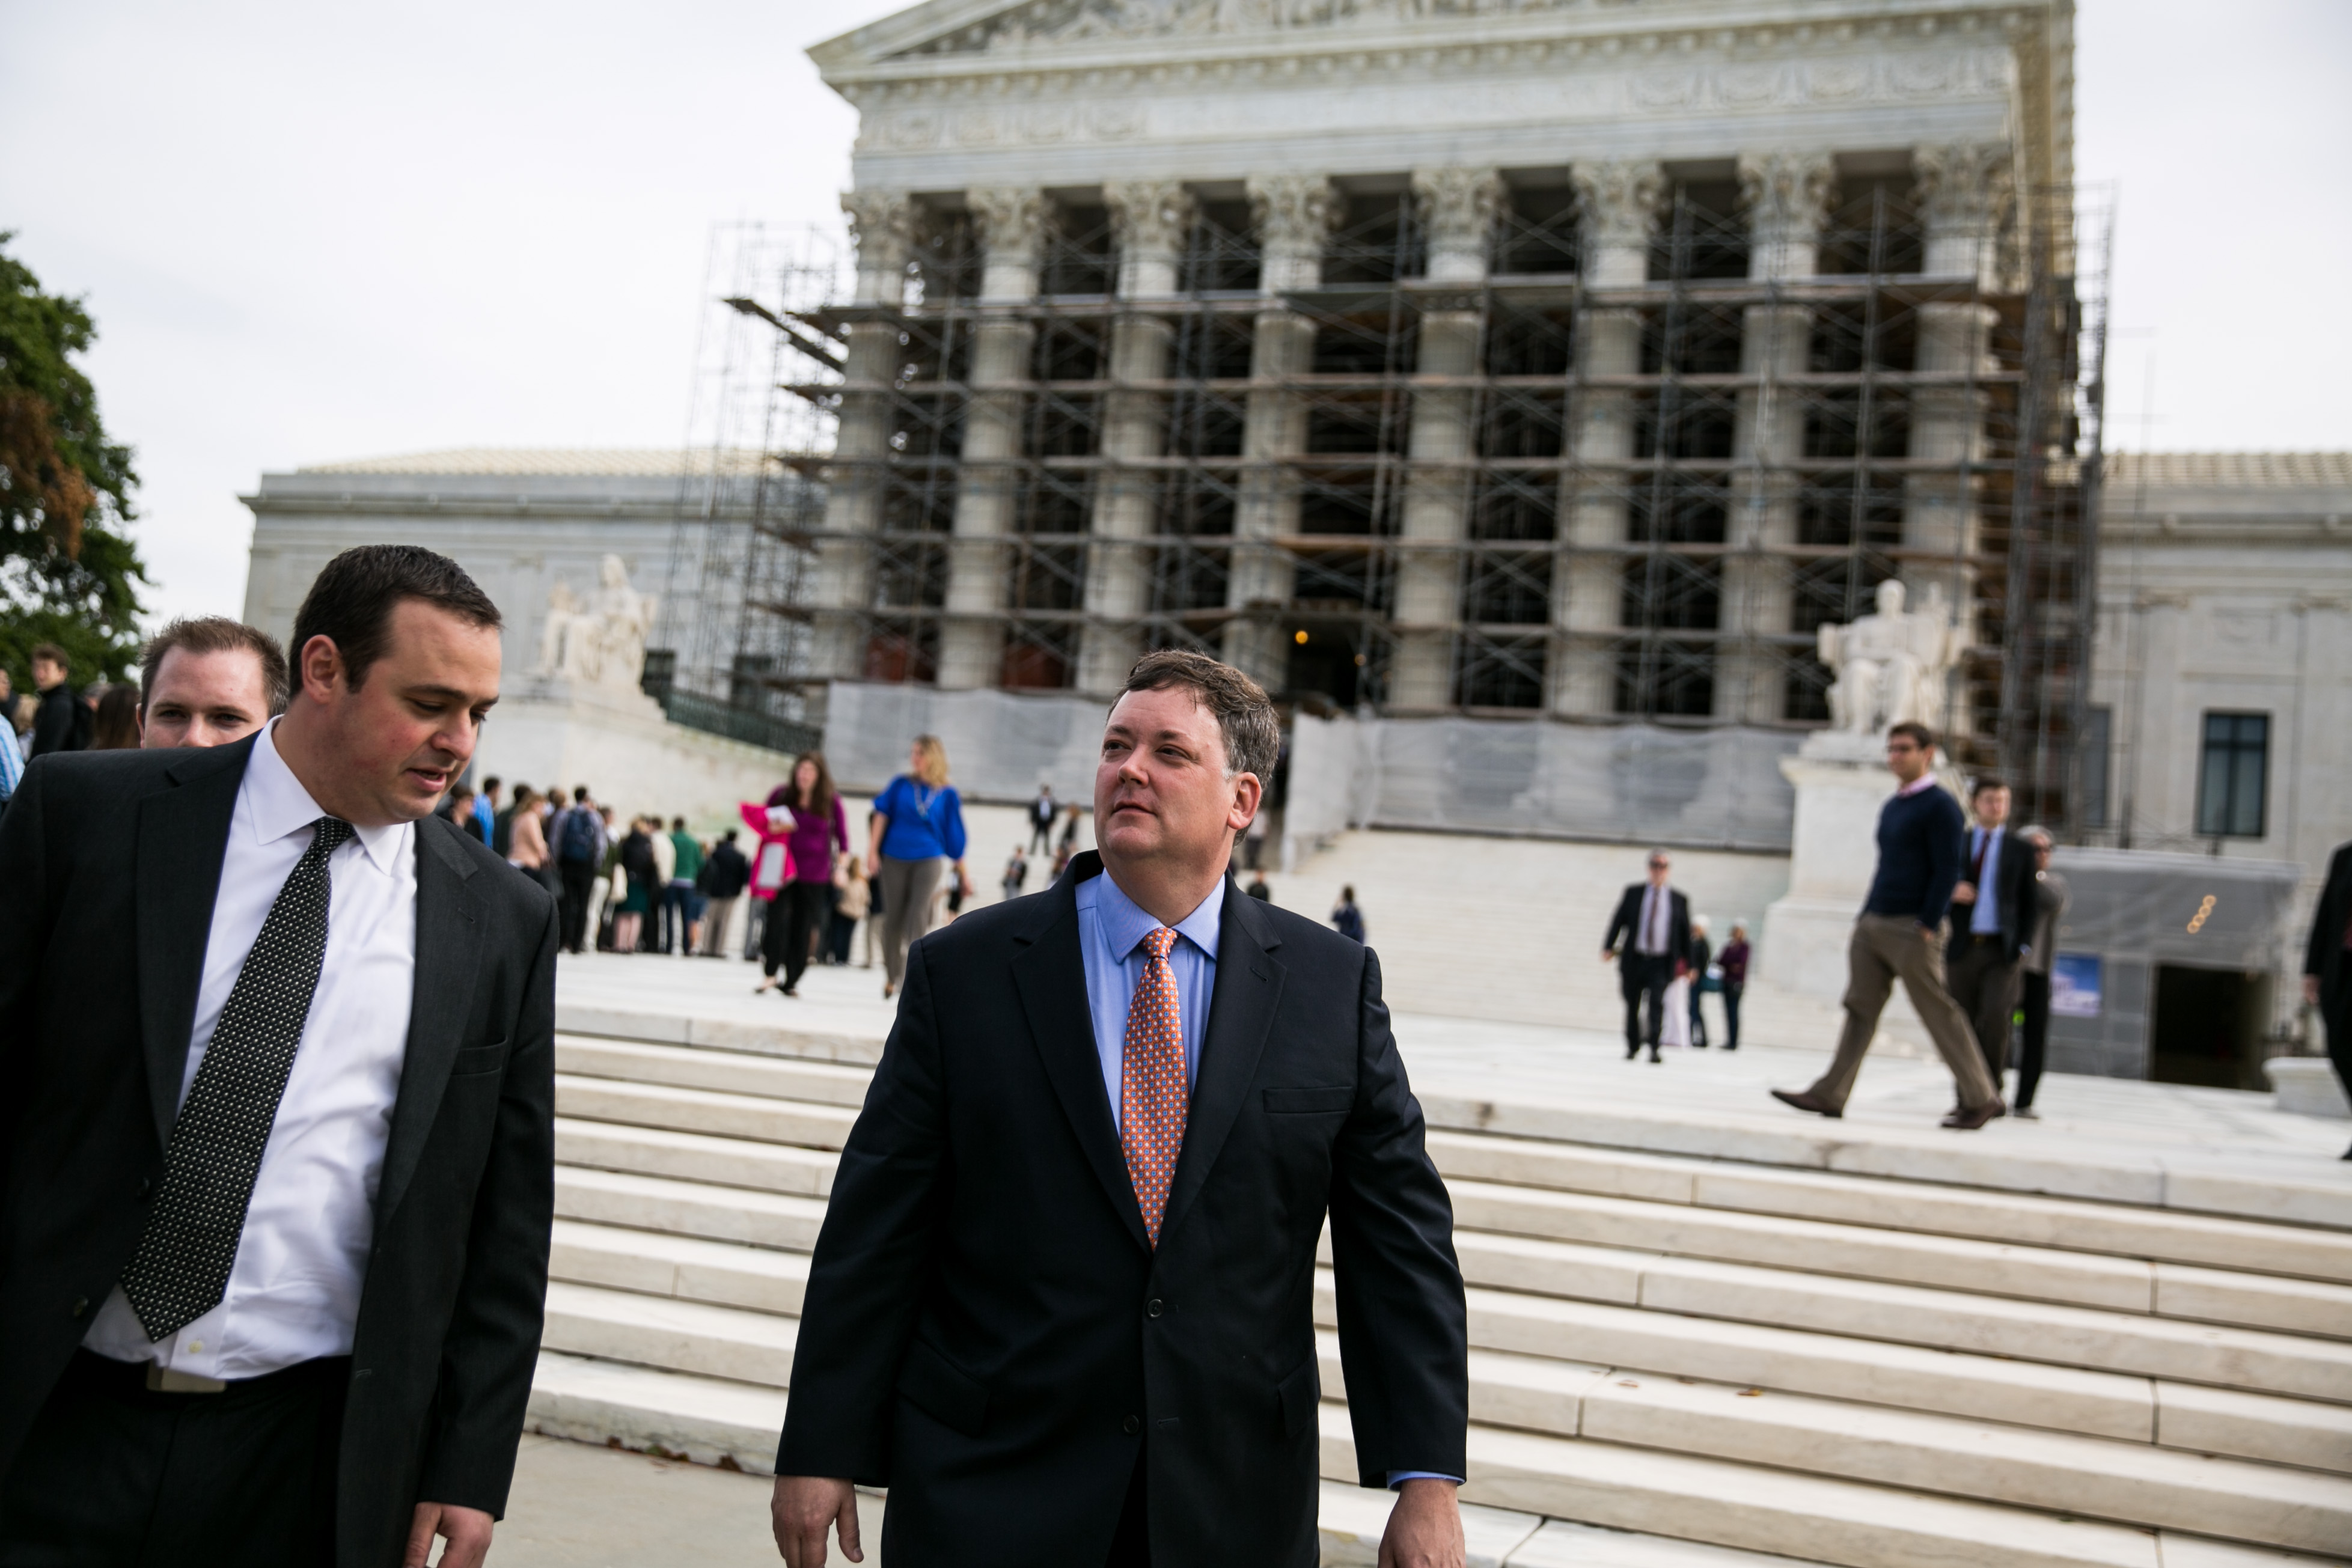 Shaun McCutcheon (R) and Dan Backer (L) at the Supreme Court in Washington, on October 8, 2013. (Drew Angerer—Getty Images)